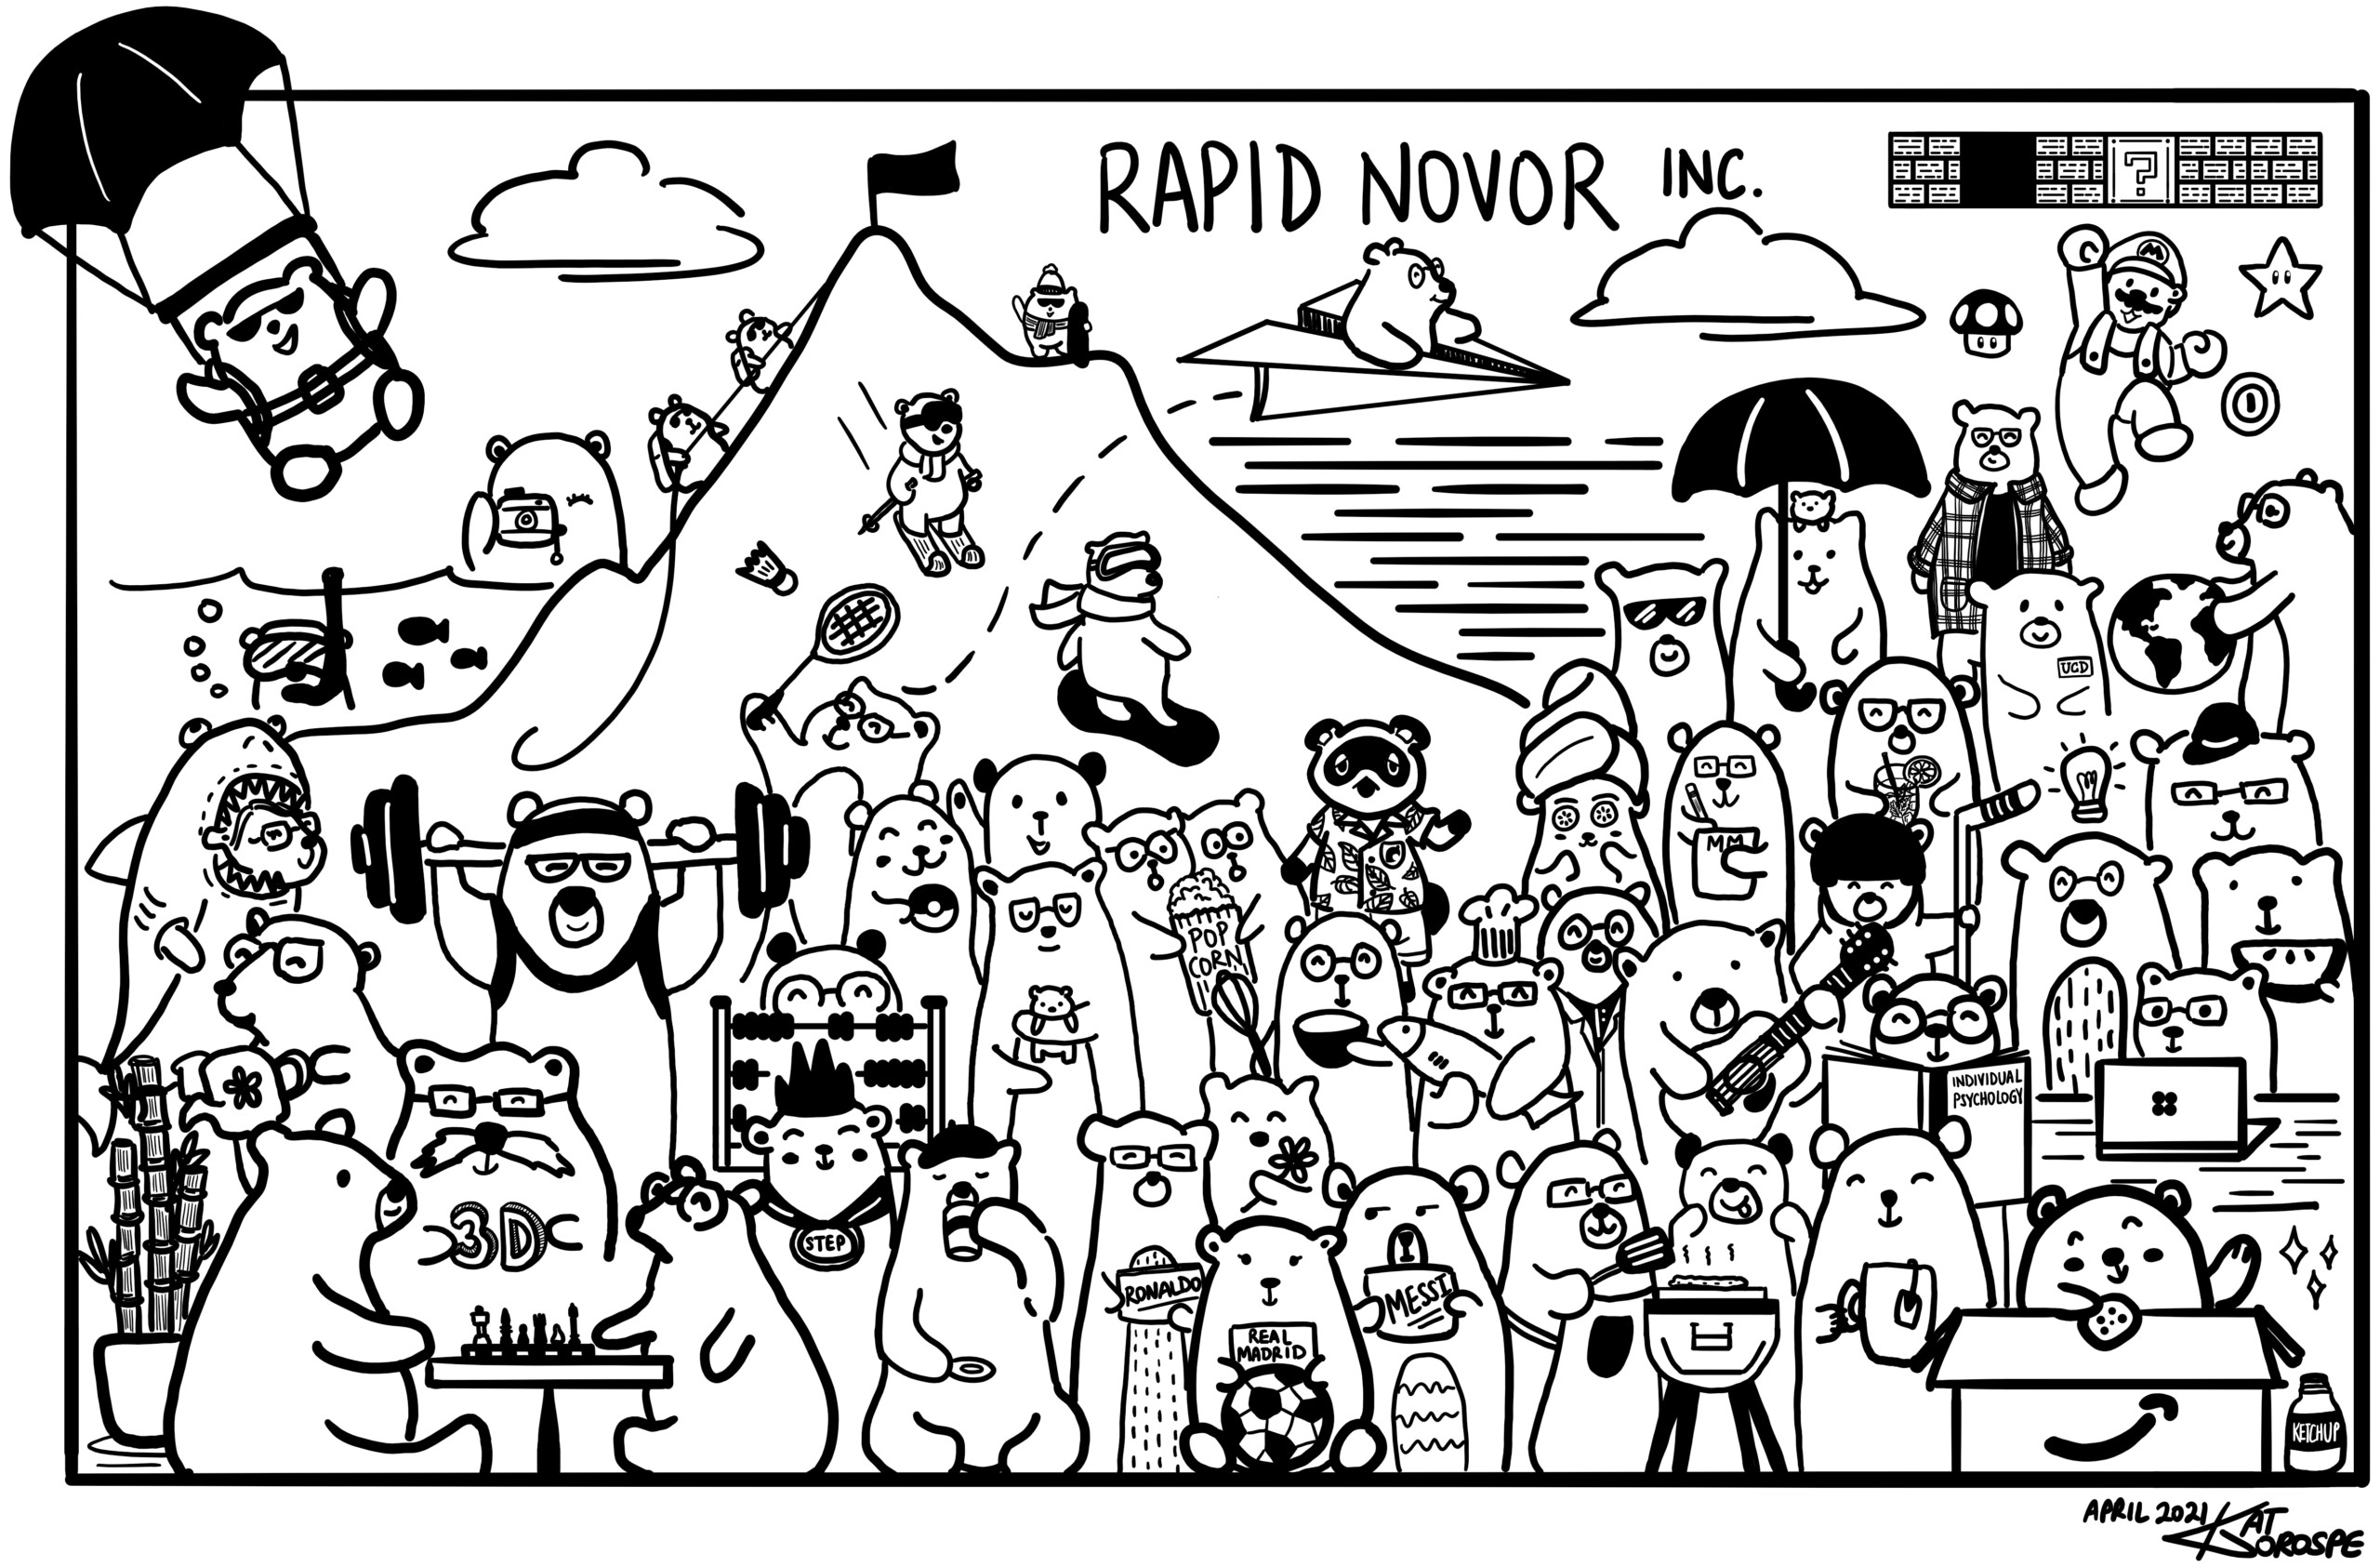 Antibody Protein Sequencing & Discovery Team at Rapid Novor